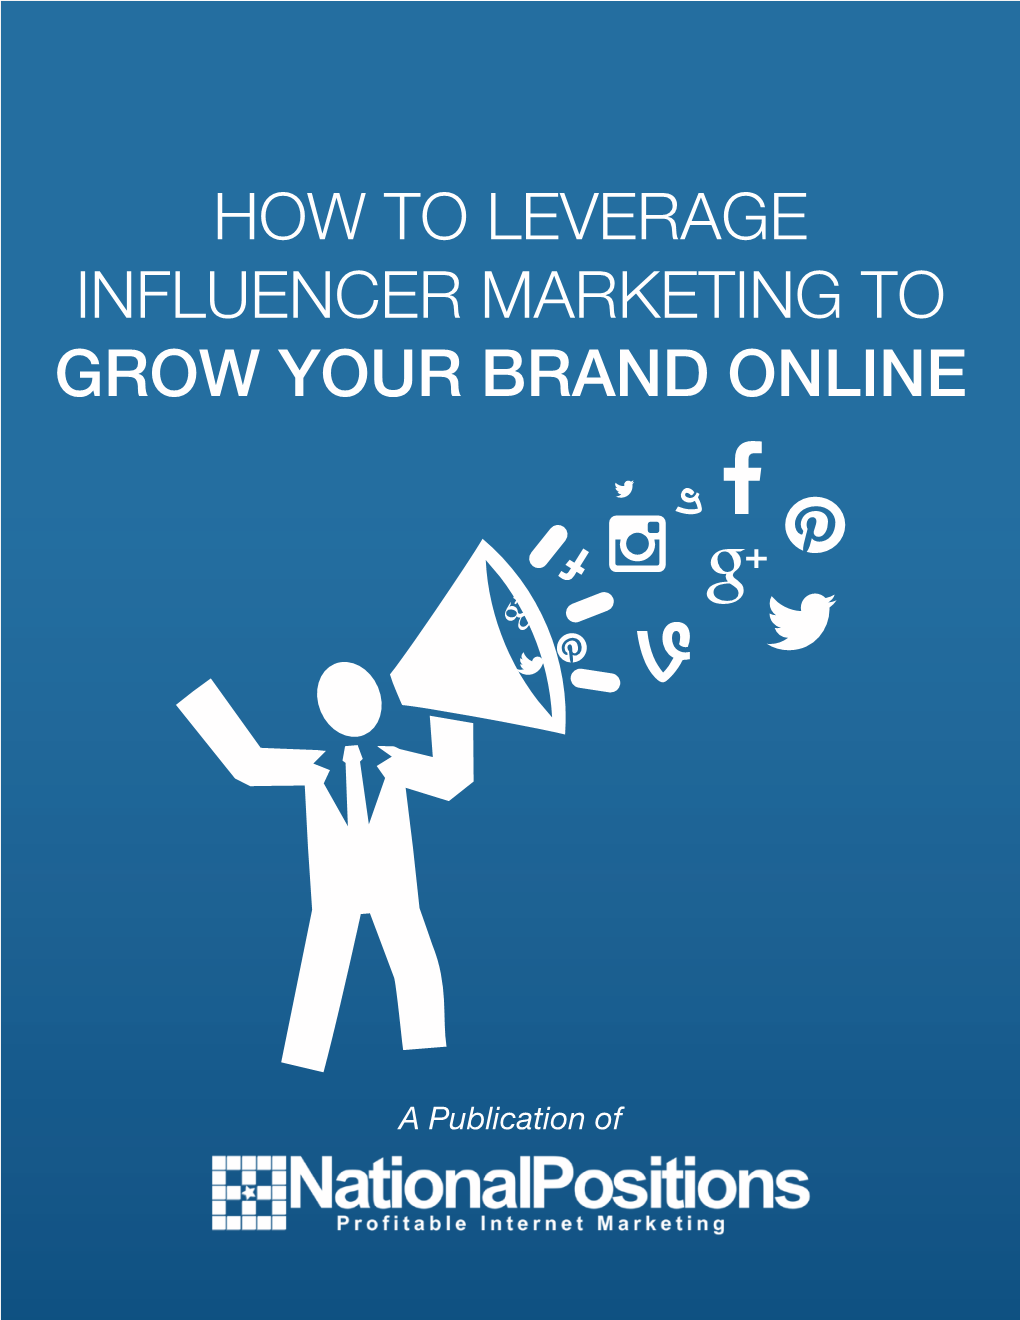 How to Leverage Influencer Marketing to Grow Your Brand Online 1